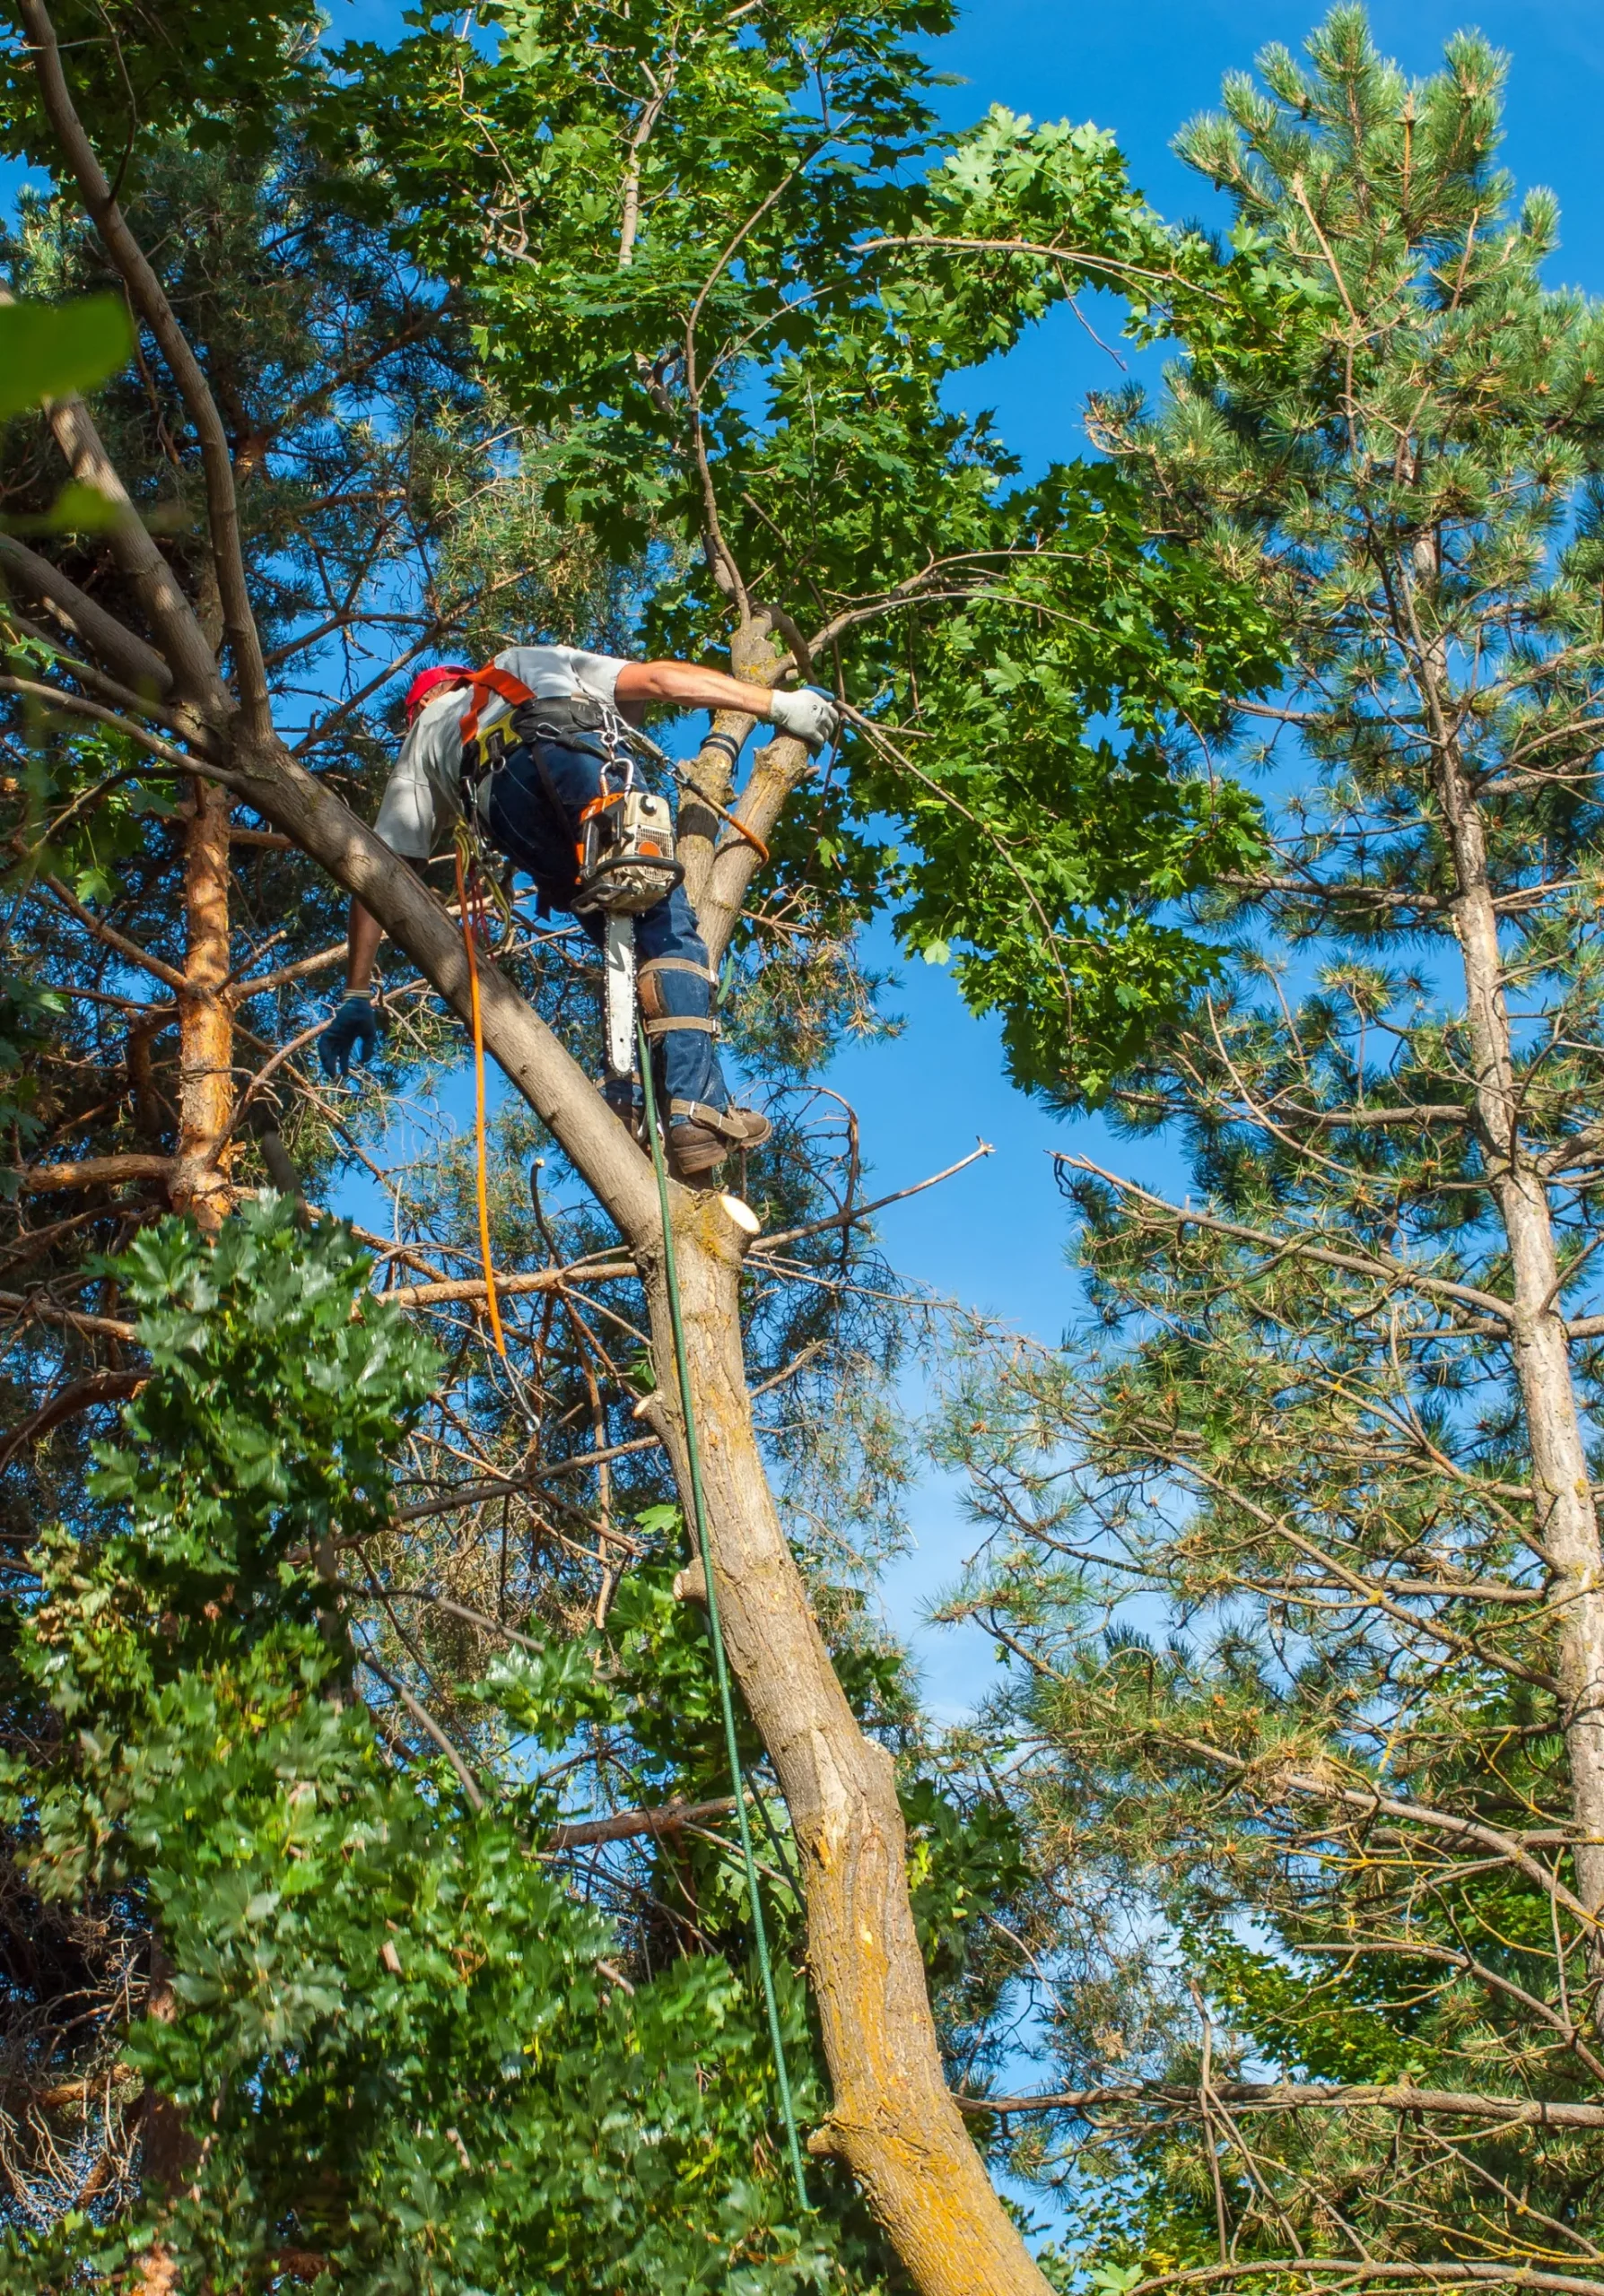 Tree service pro high up in tree using specialist equipment to trim trees in Boca Florida